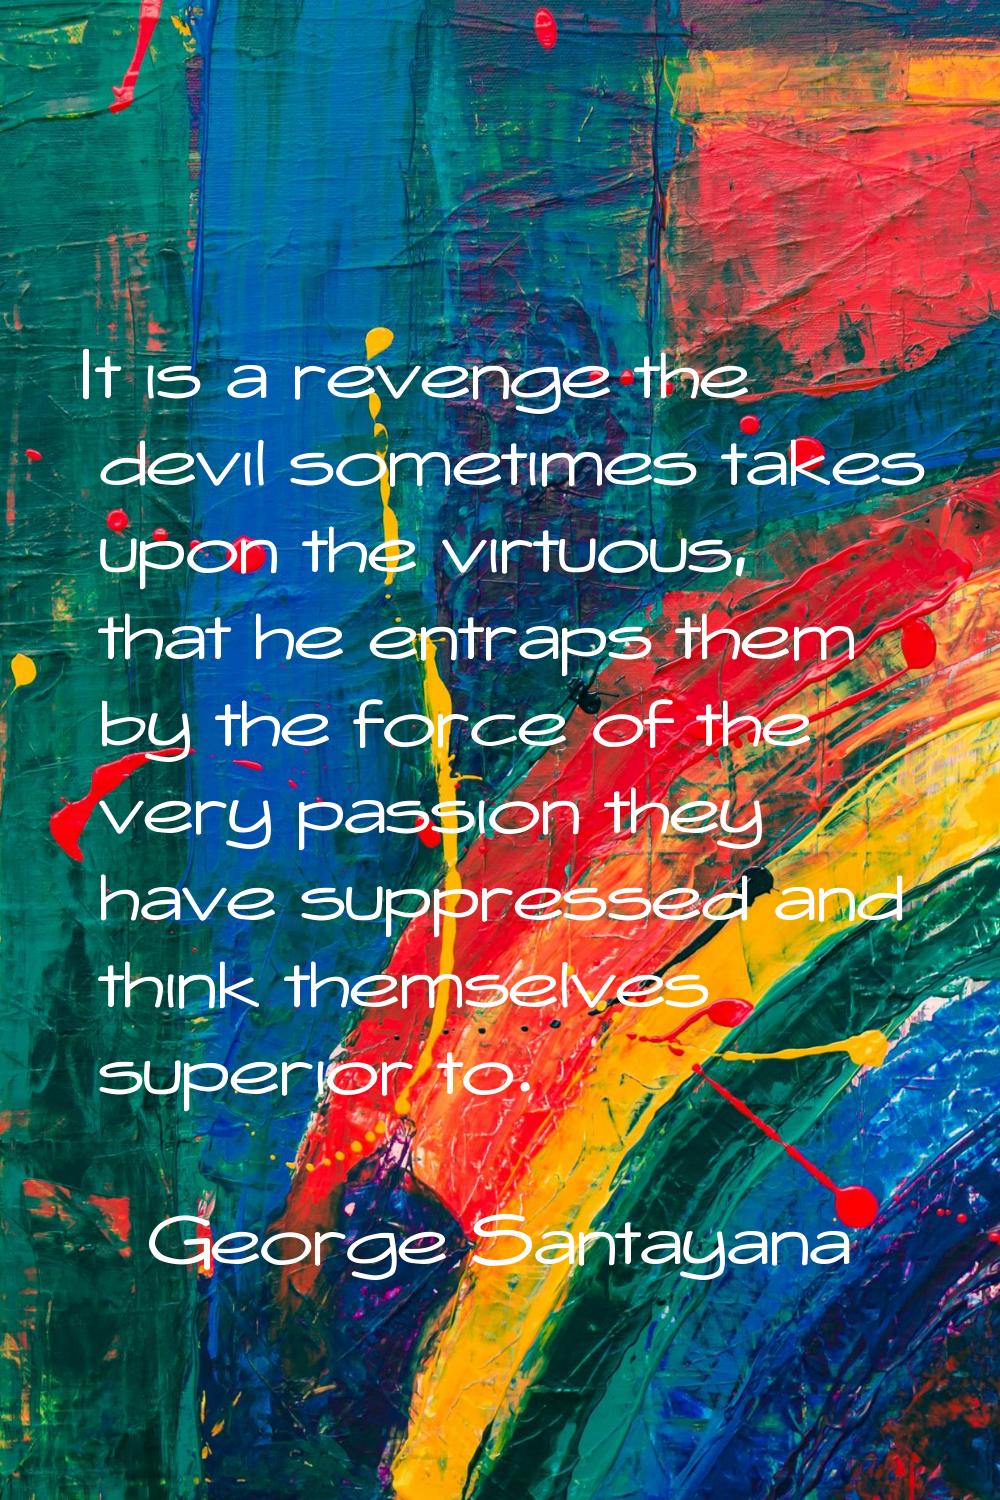 It is a revenge the devil sometimes takes upon the virtuous, that he entraps them by the force of t